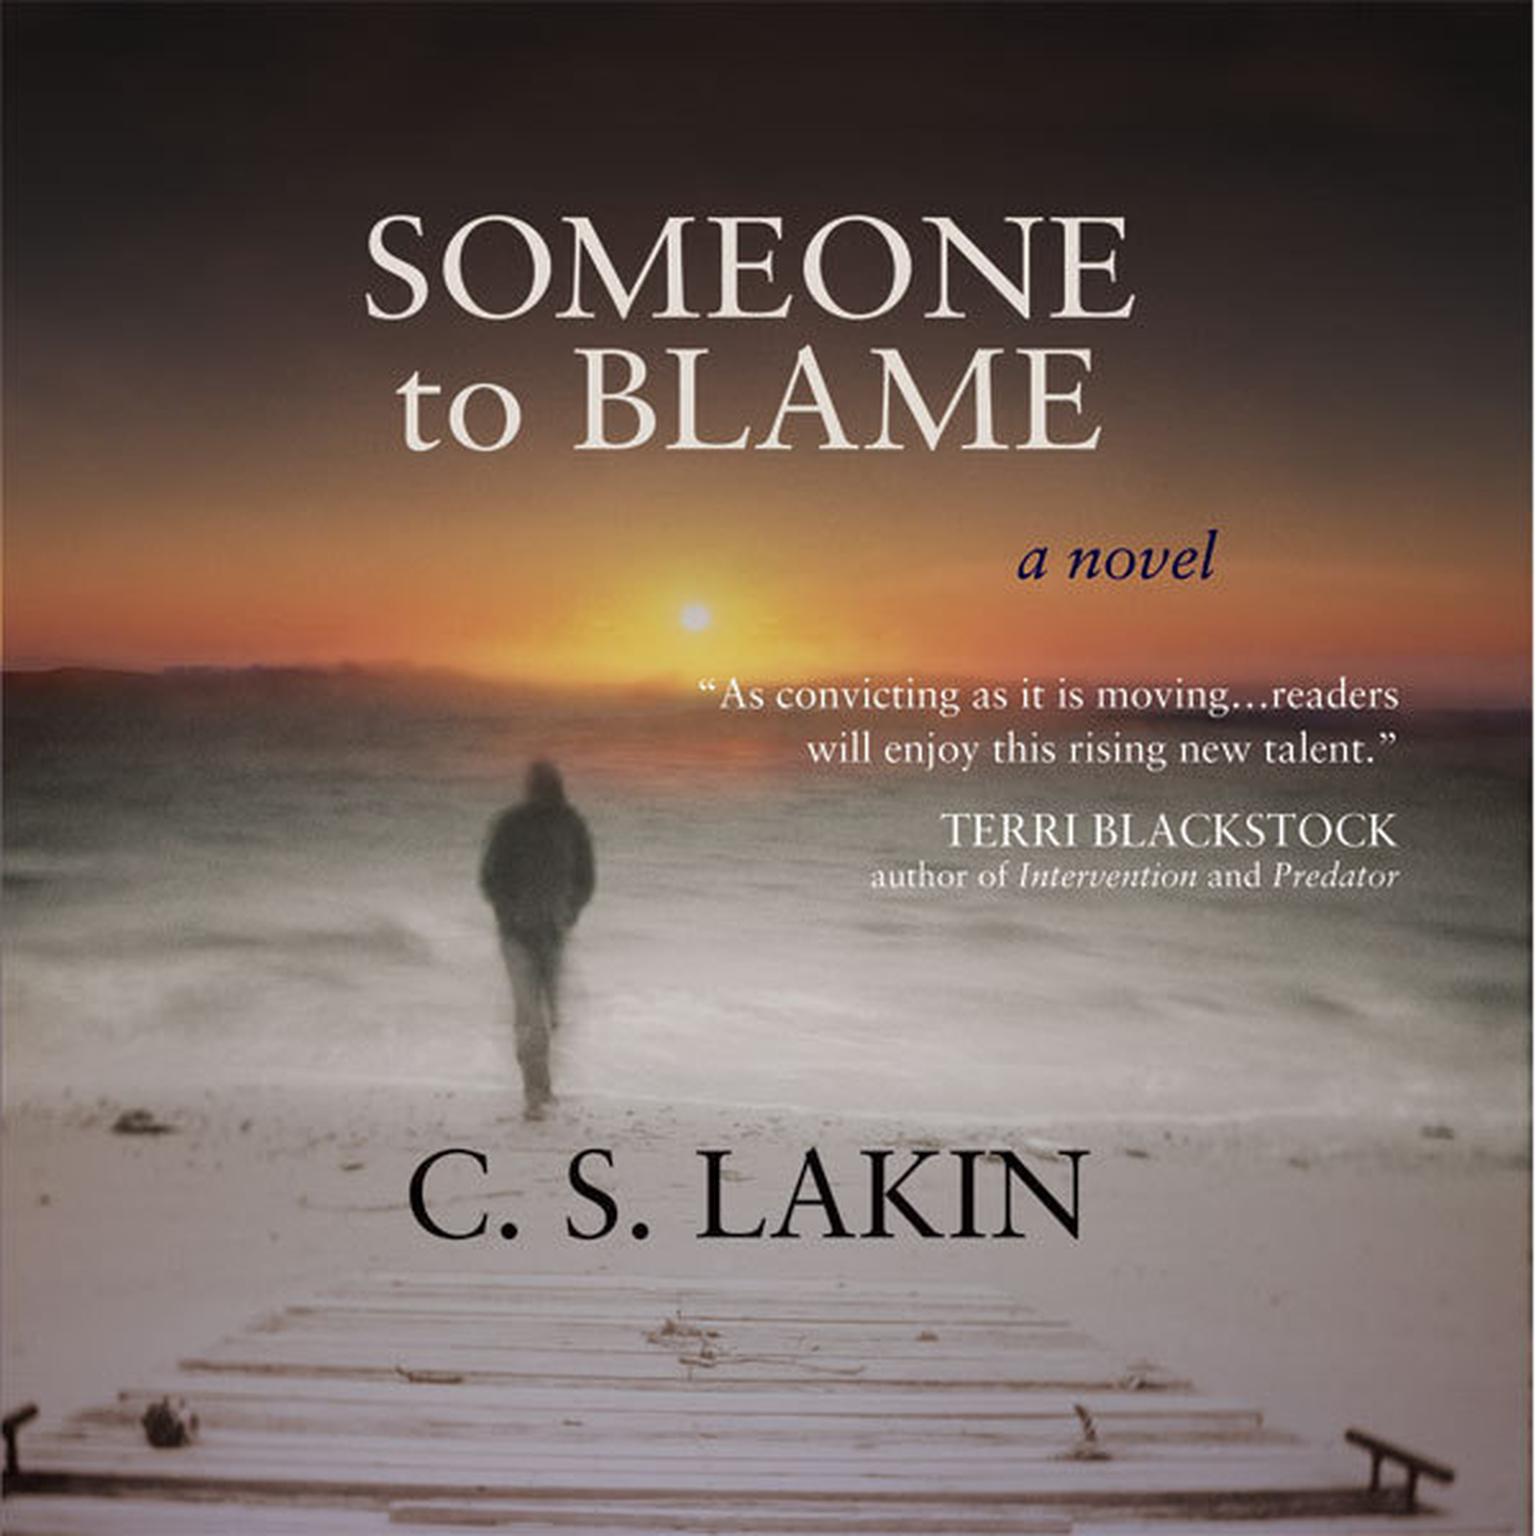 Someone to Blame Audiobook, by C. S. Lakin